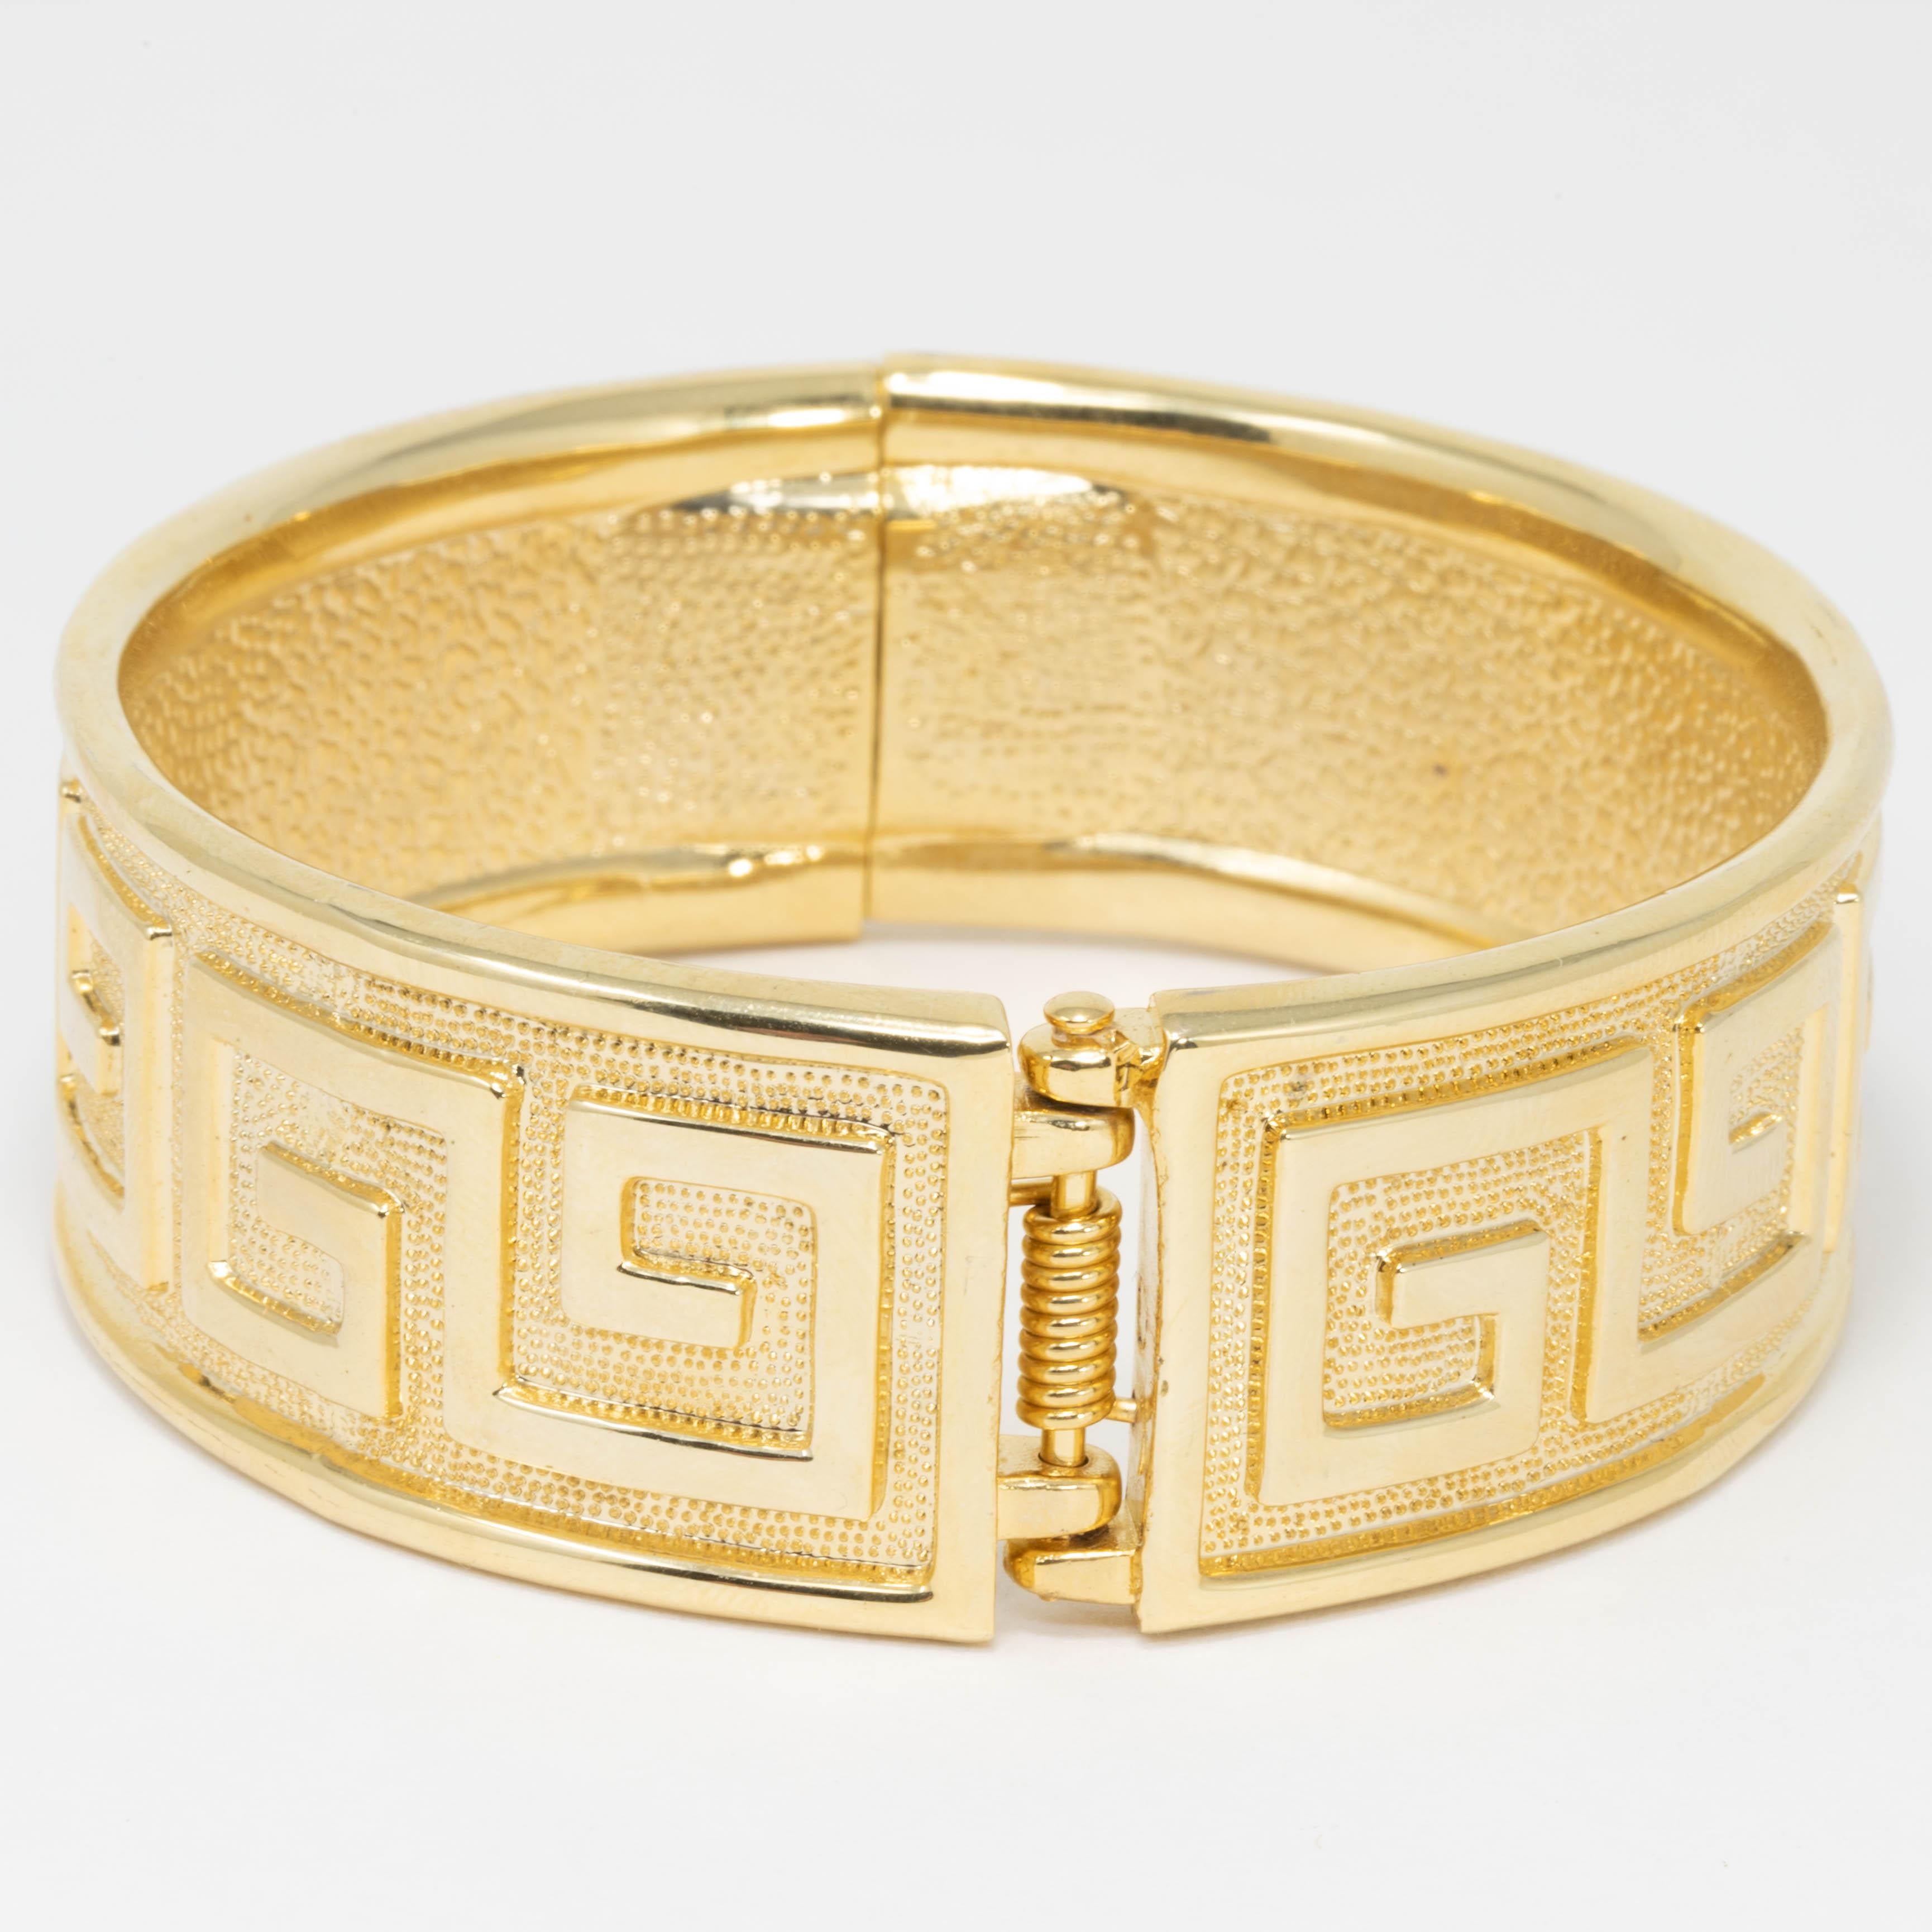 A bold gold bacelet! This stylish bangle features textured goldtone texture with raised abstract motifs.

Inner circumference: 7.75 in / 19.5 cm
Inner diameter: 2.5 in / 6.5 cm